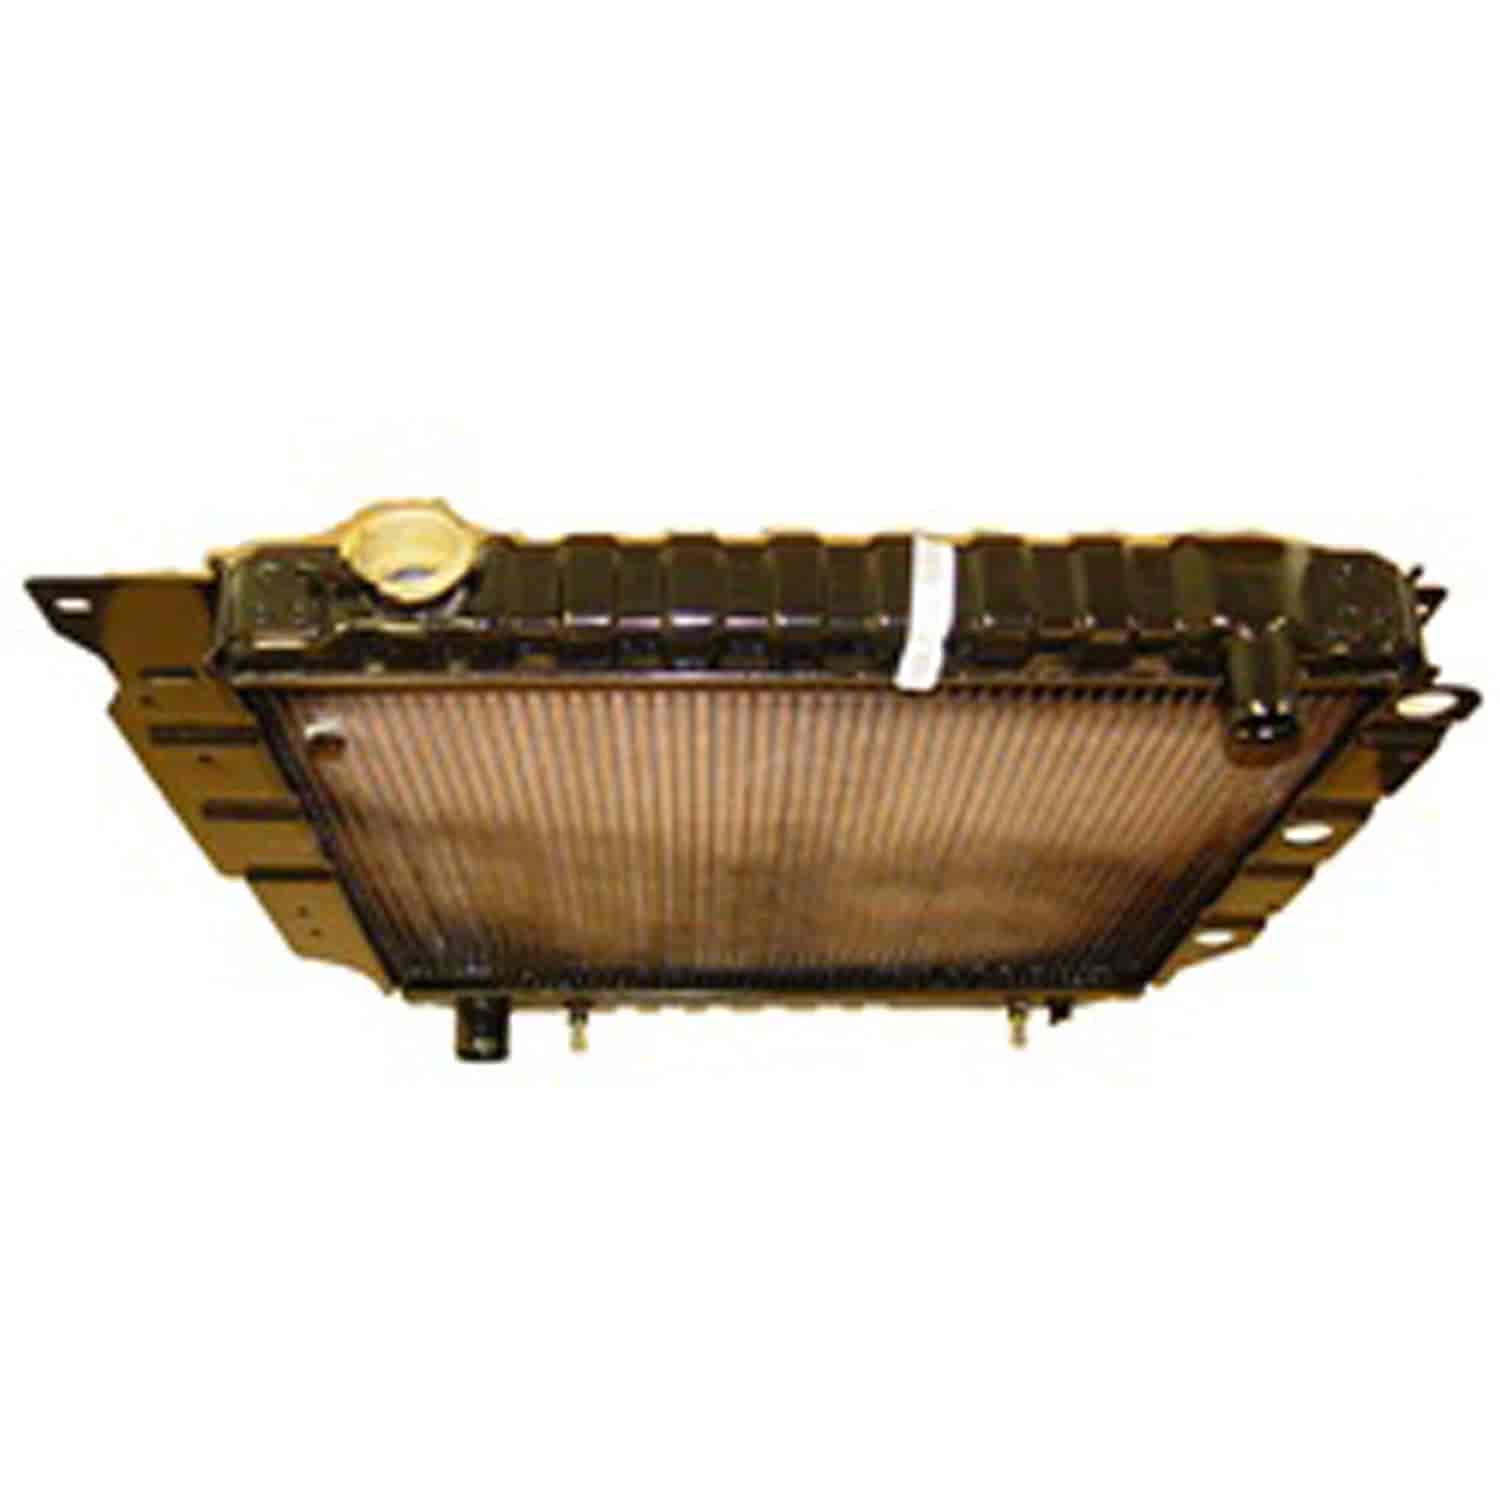 This 1 row radiator with or without AC from Omix-ADA fits MT or AT 92-95 Wrangler a 2.5L and 4.0L engine.